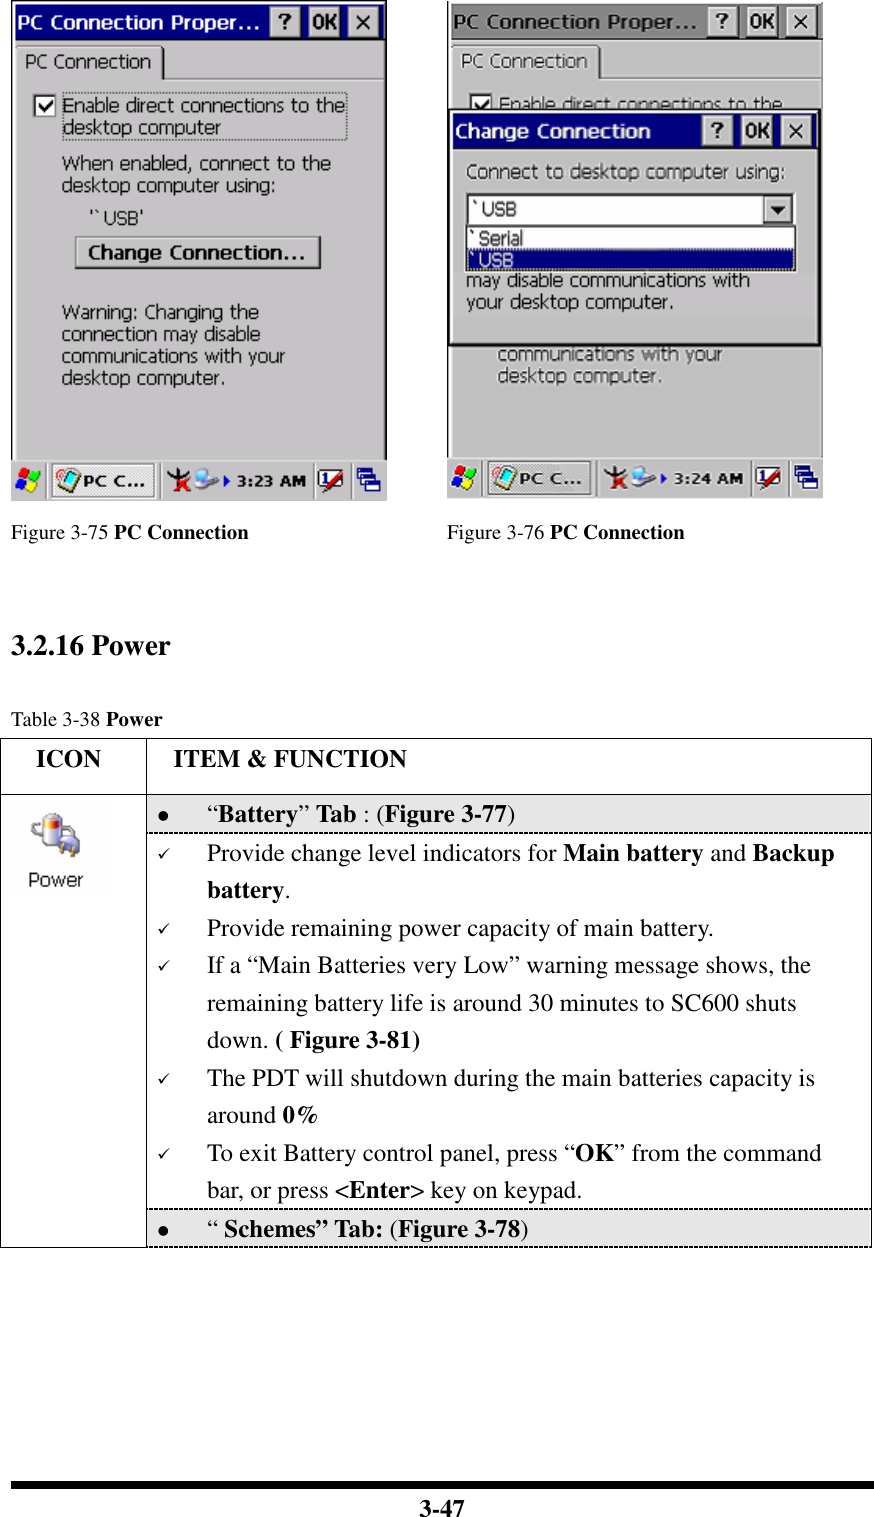  3-47   Figure 3-75 PC Connection  Figure 3-76 PC Connection   3.2.16 Power  Table 3-38 Power     ICON  ITEM &amp; FUNCTION  “Battery” Tab : (Figure 3-77)  Provide change level indicators for Main battery and Backup battery.  Provide remaining power capacity of main battery.  If a “Main Batteries very Low” warning message shows, the remaining battery life is around 30 minutes to SC600 shuts down. ( Figure 3-81)  The PDT will shutdown during the main batteries capacity is around 0%  To exit Battery control panel, press “OK” from the command bar, or press &lt;Enter&gt; key on keypad.   “ Schemes” Tab: (Figure 3-78) 